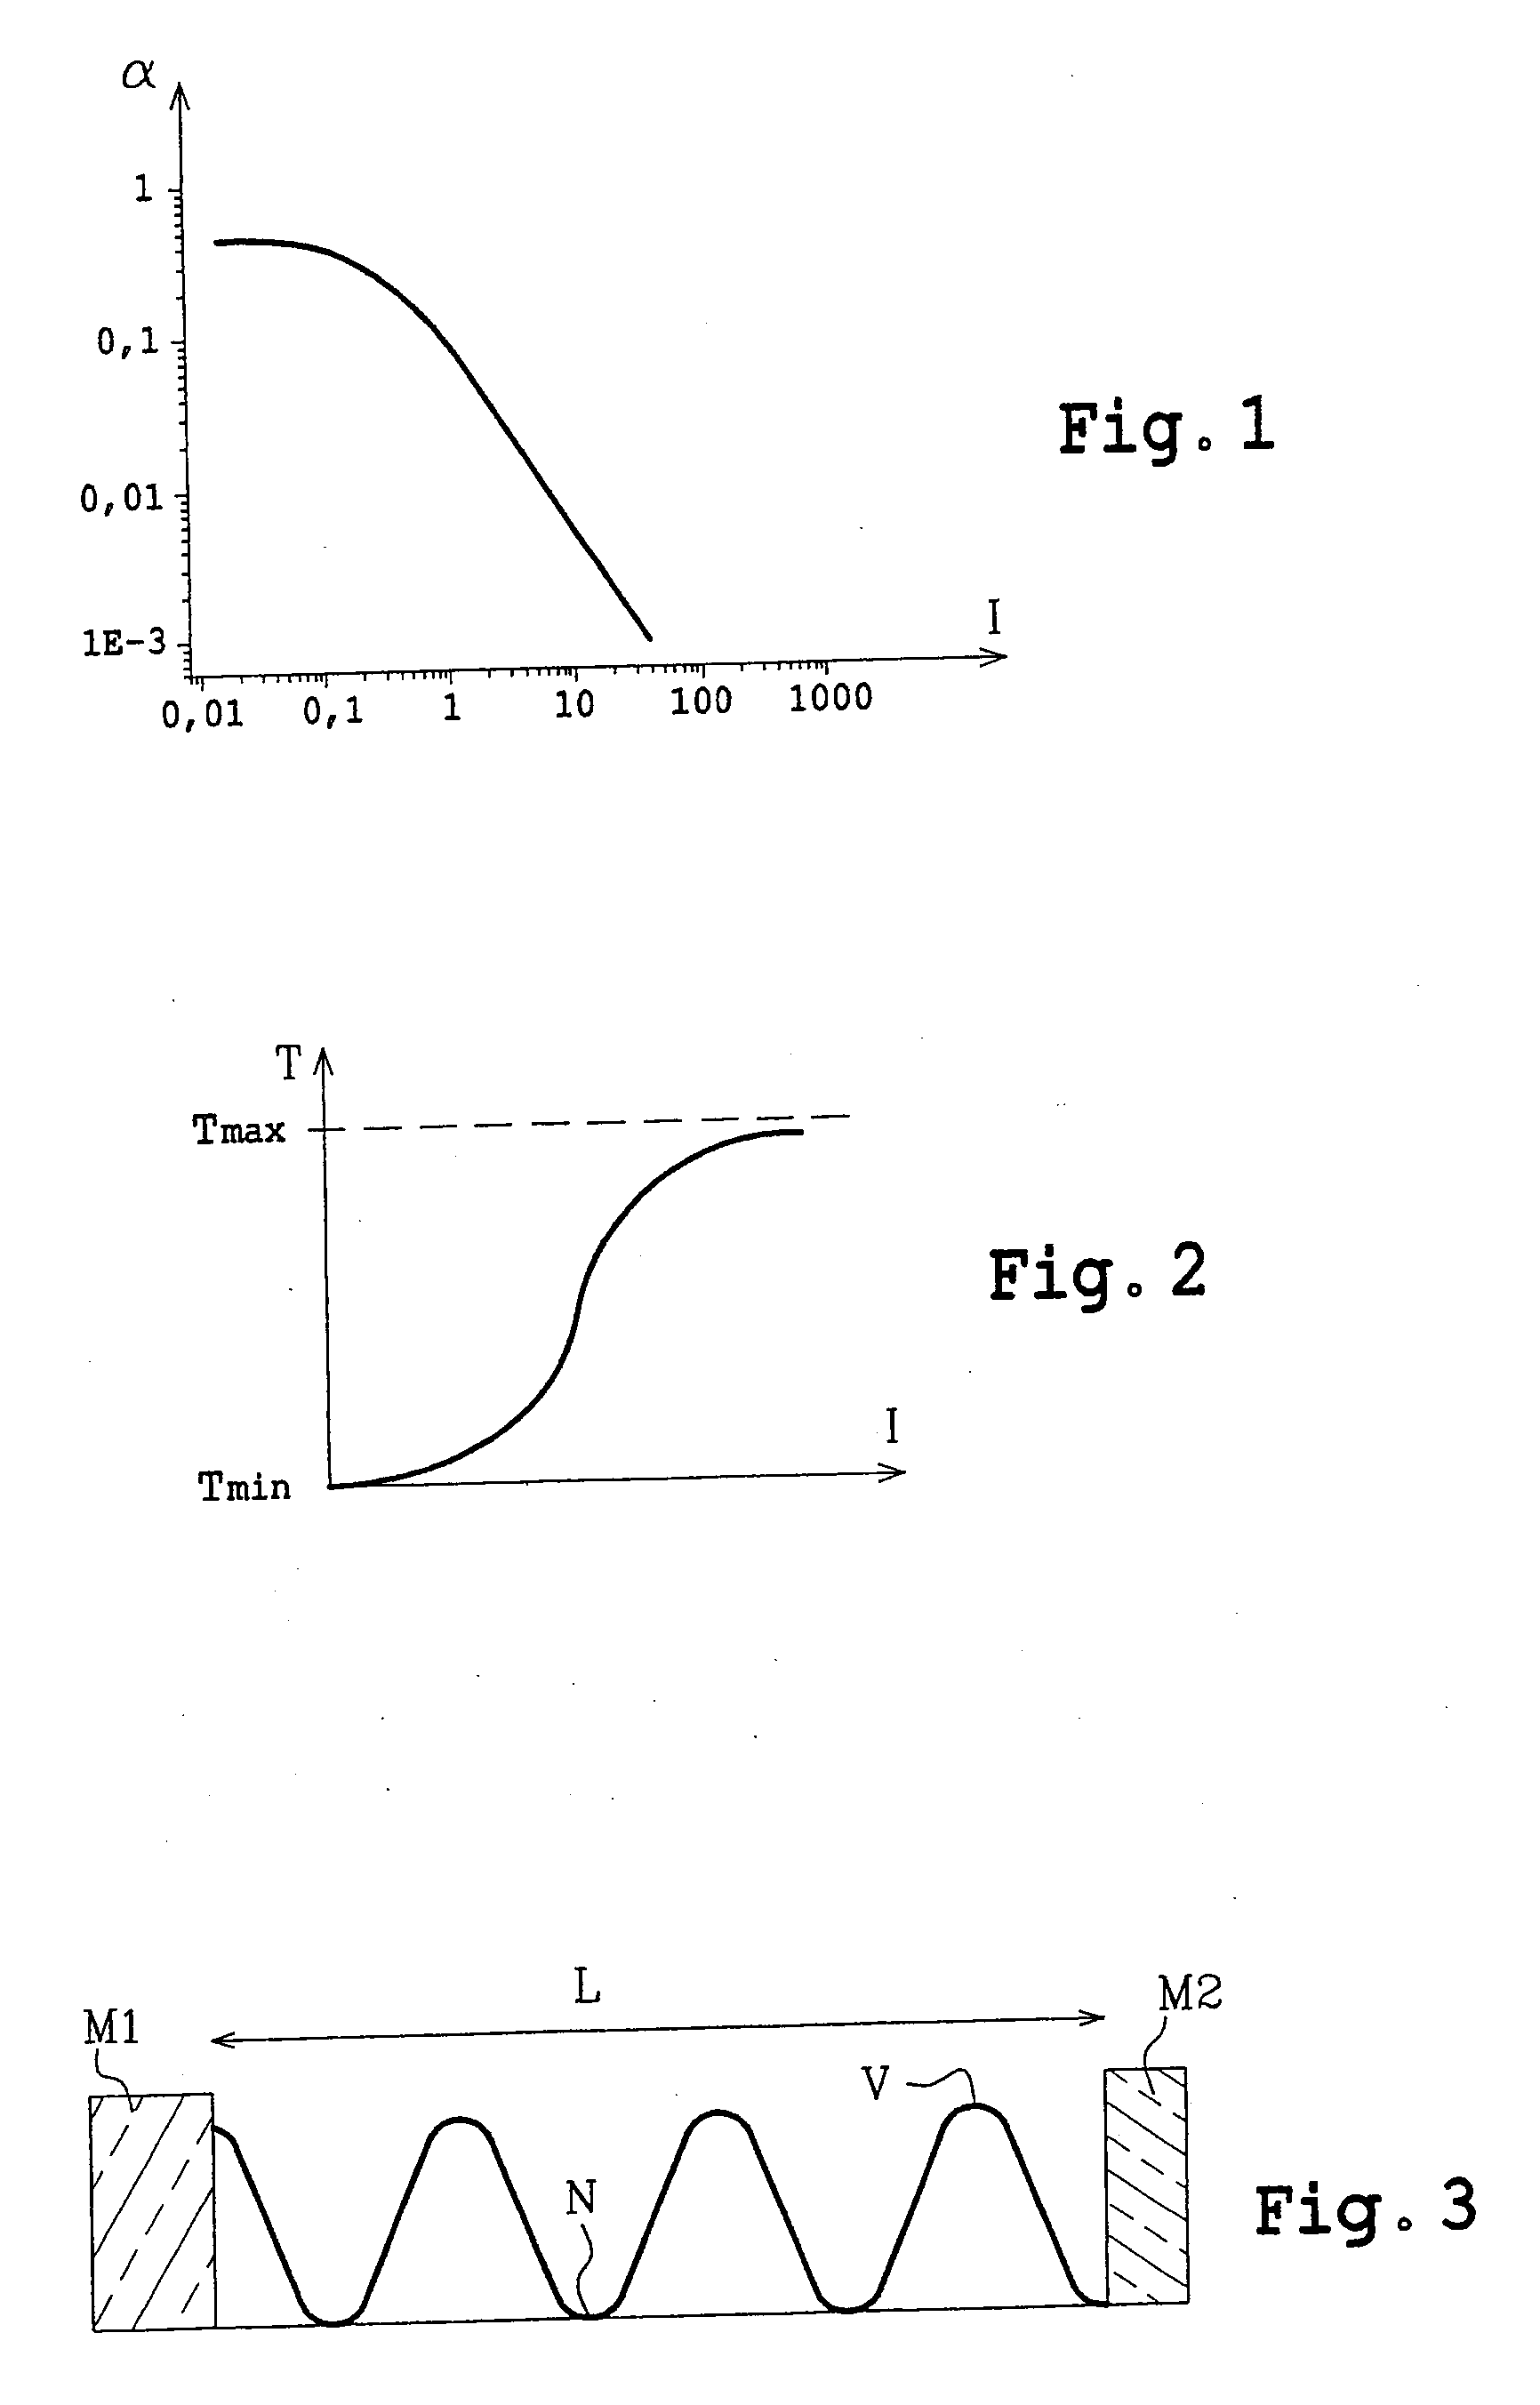 Saturable absorber component and method for manufacturing a saturable absorber component